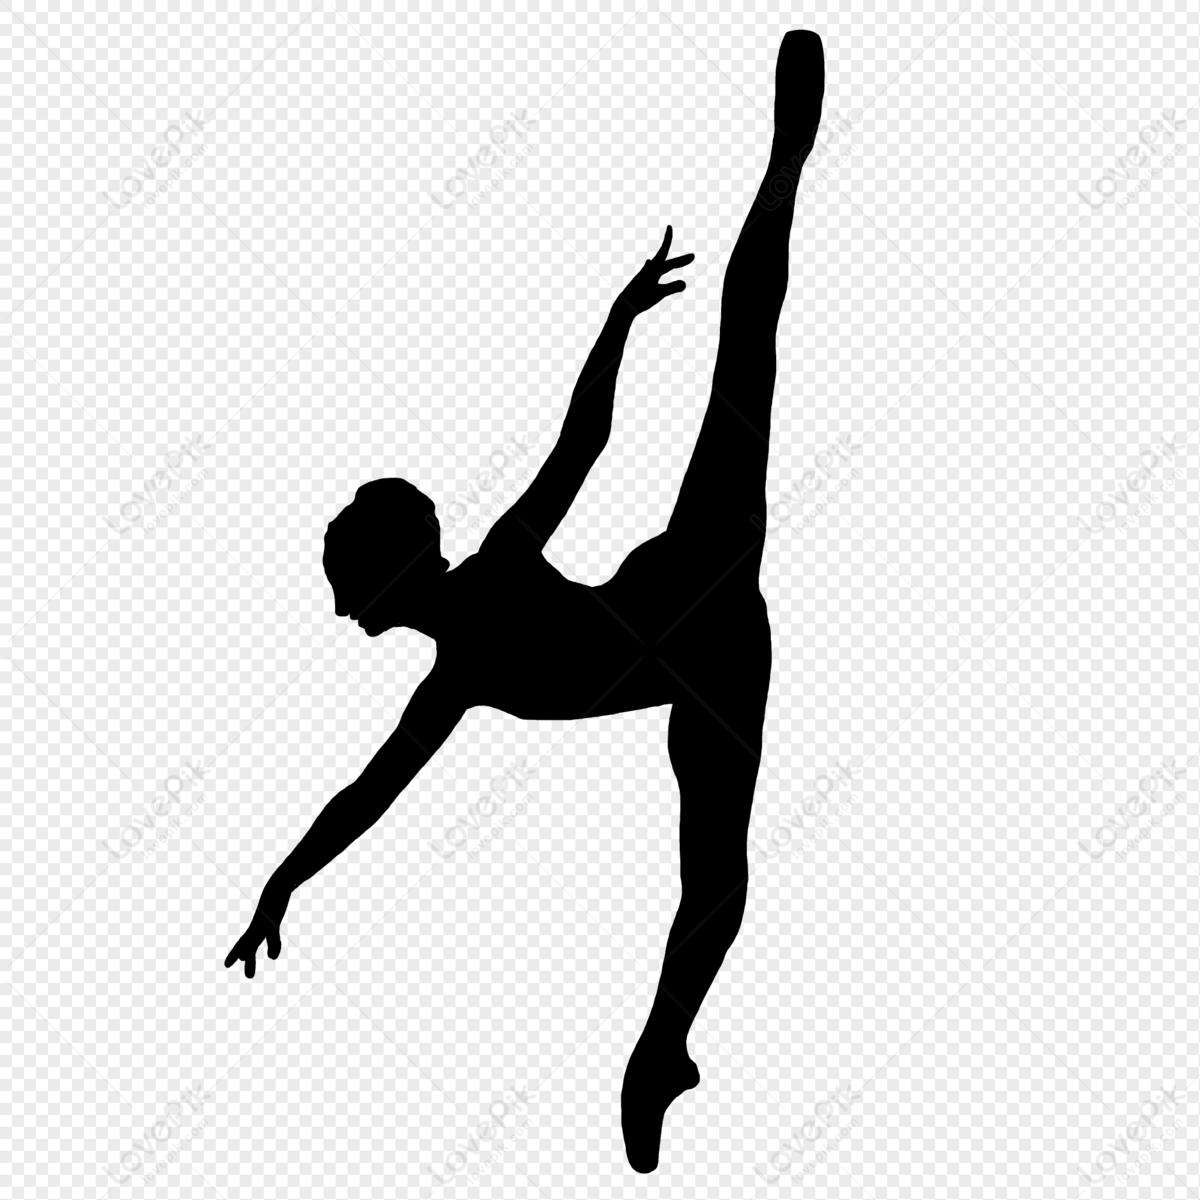 jazz dancer silhouette png